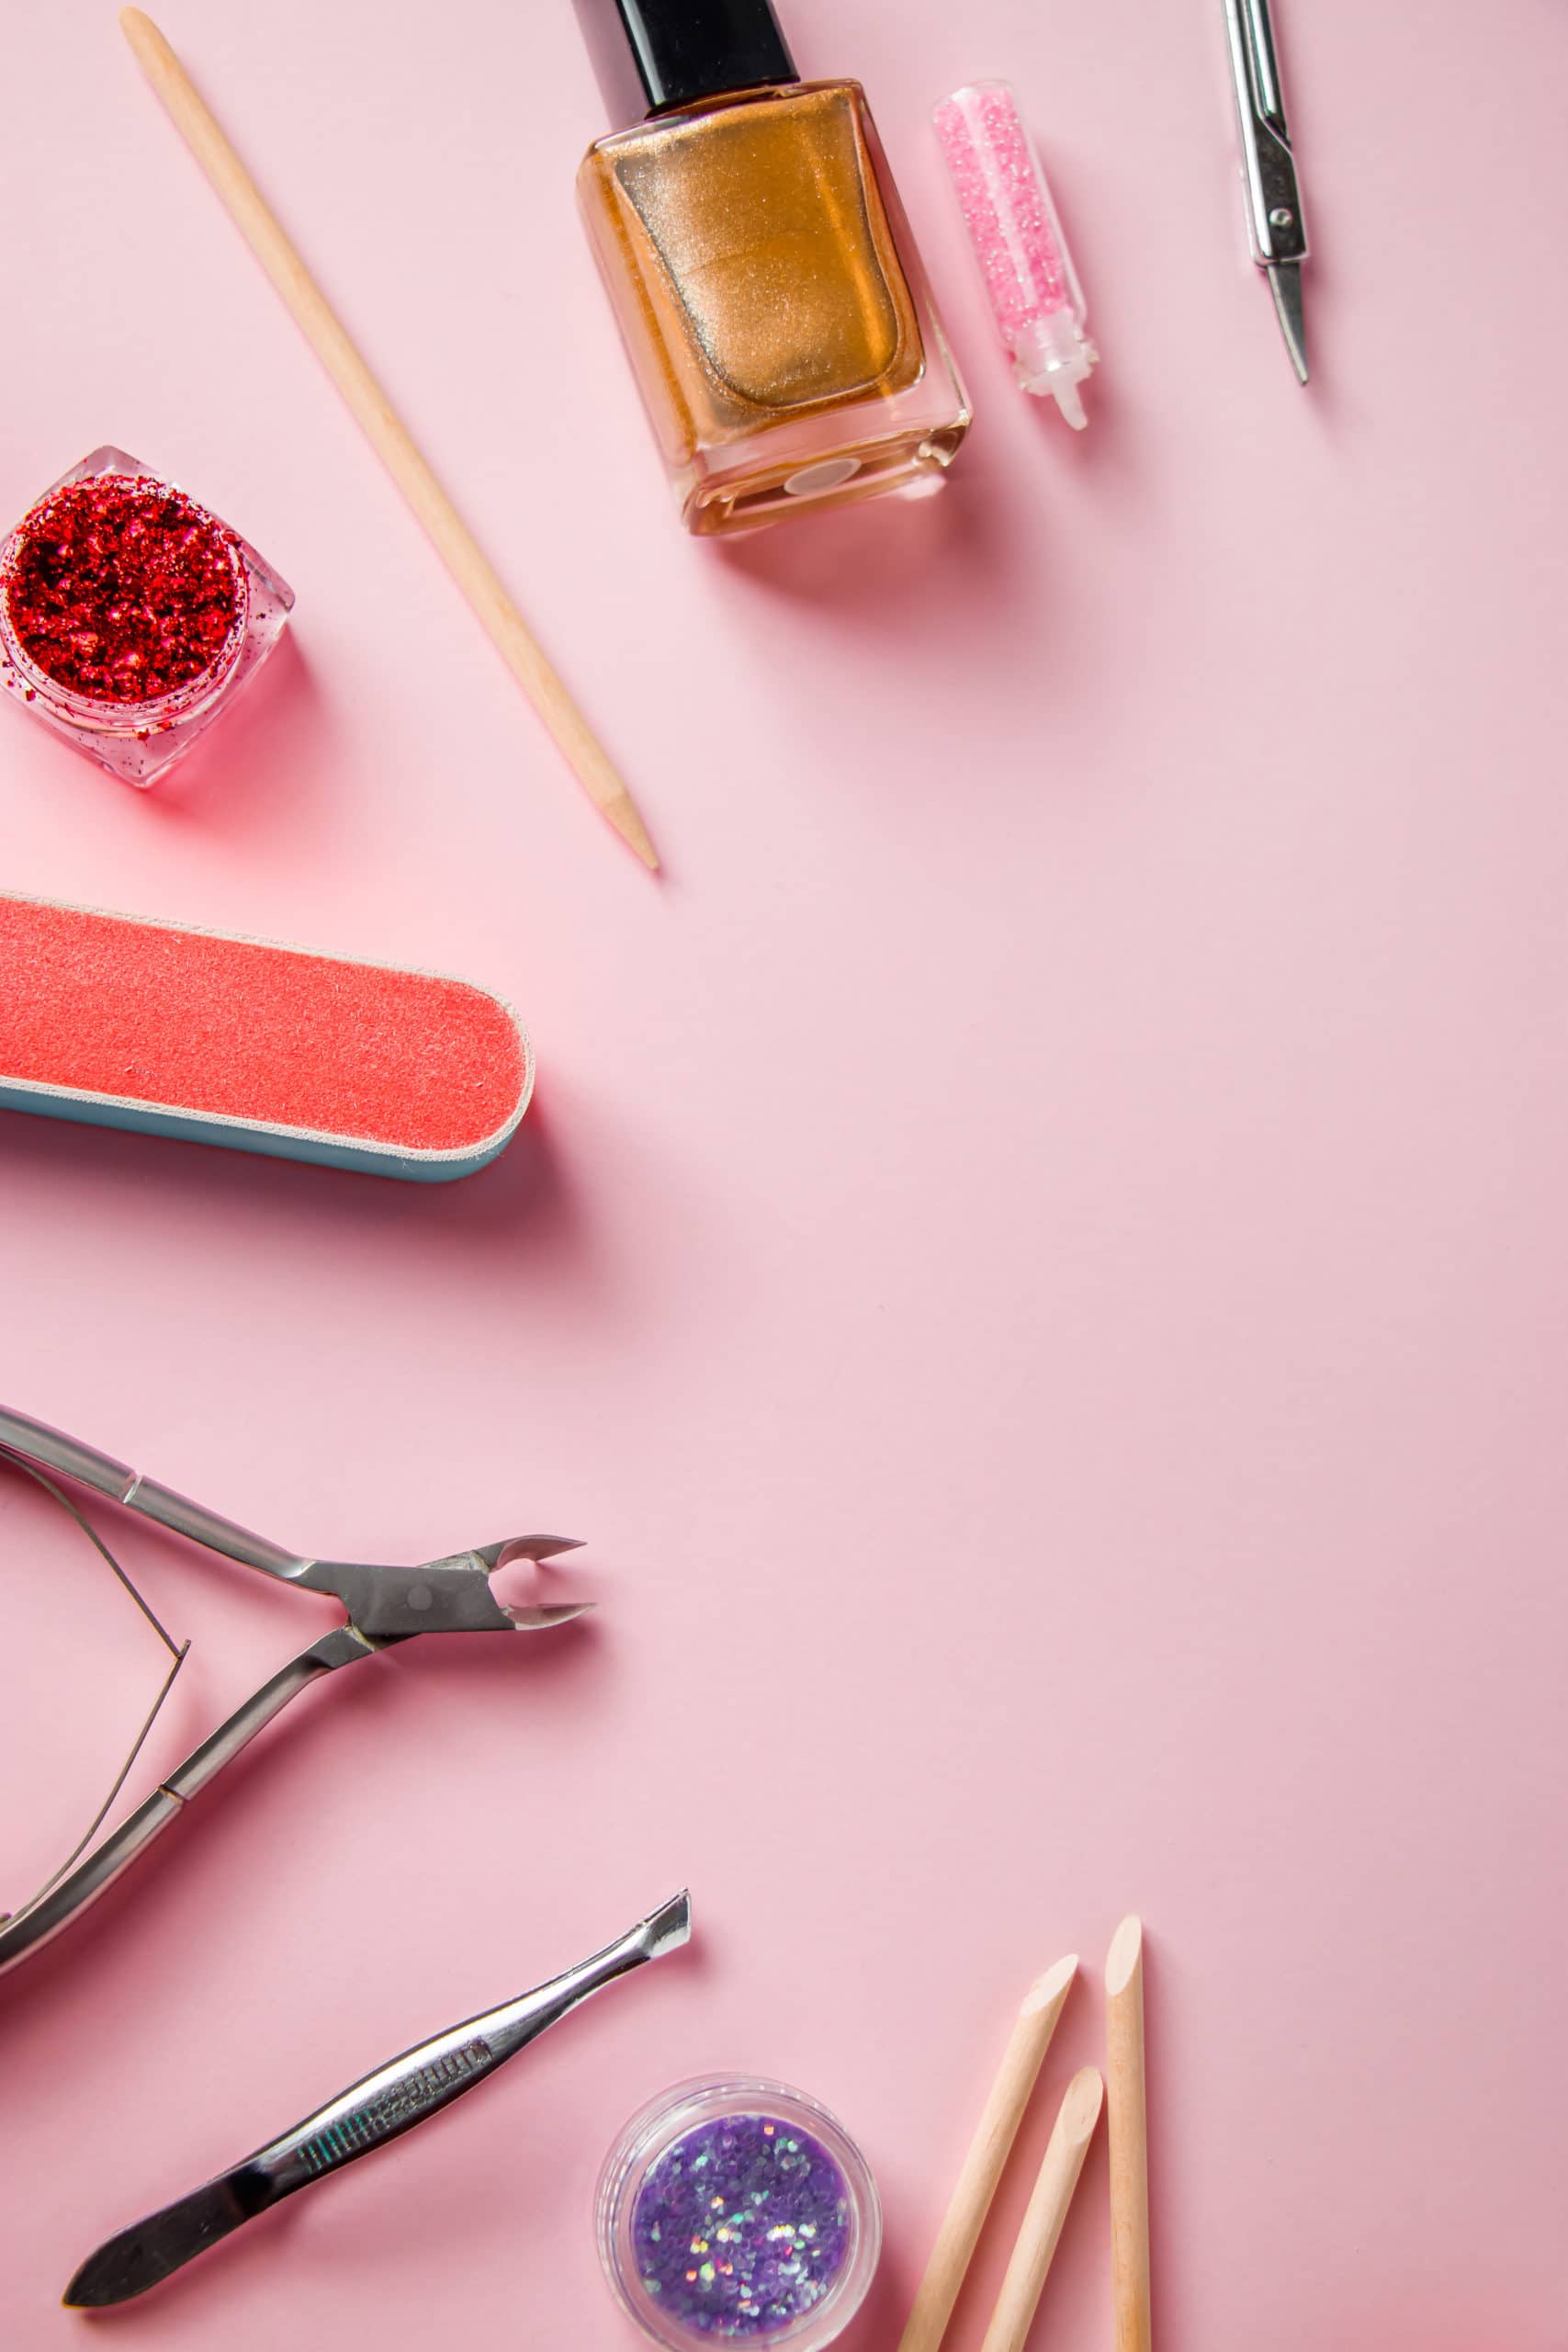 A set of tools for manicure and nail care on a pink background. Workplace in a beauty salon. Place for text.